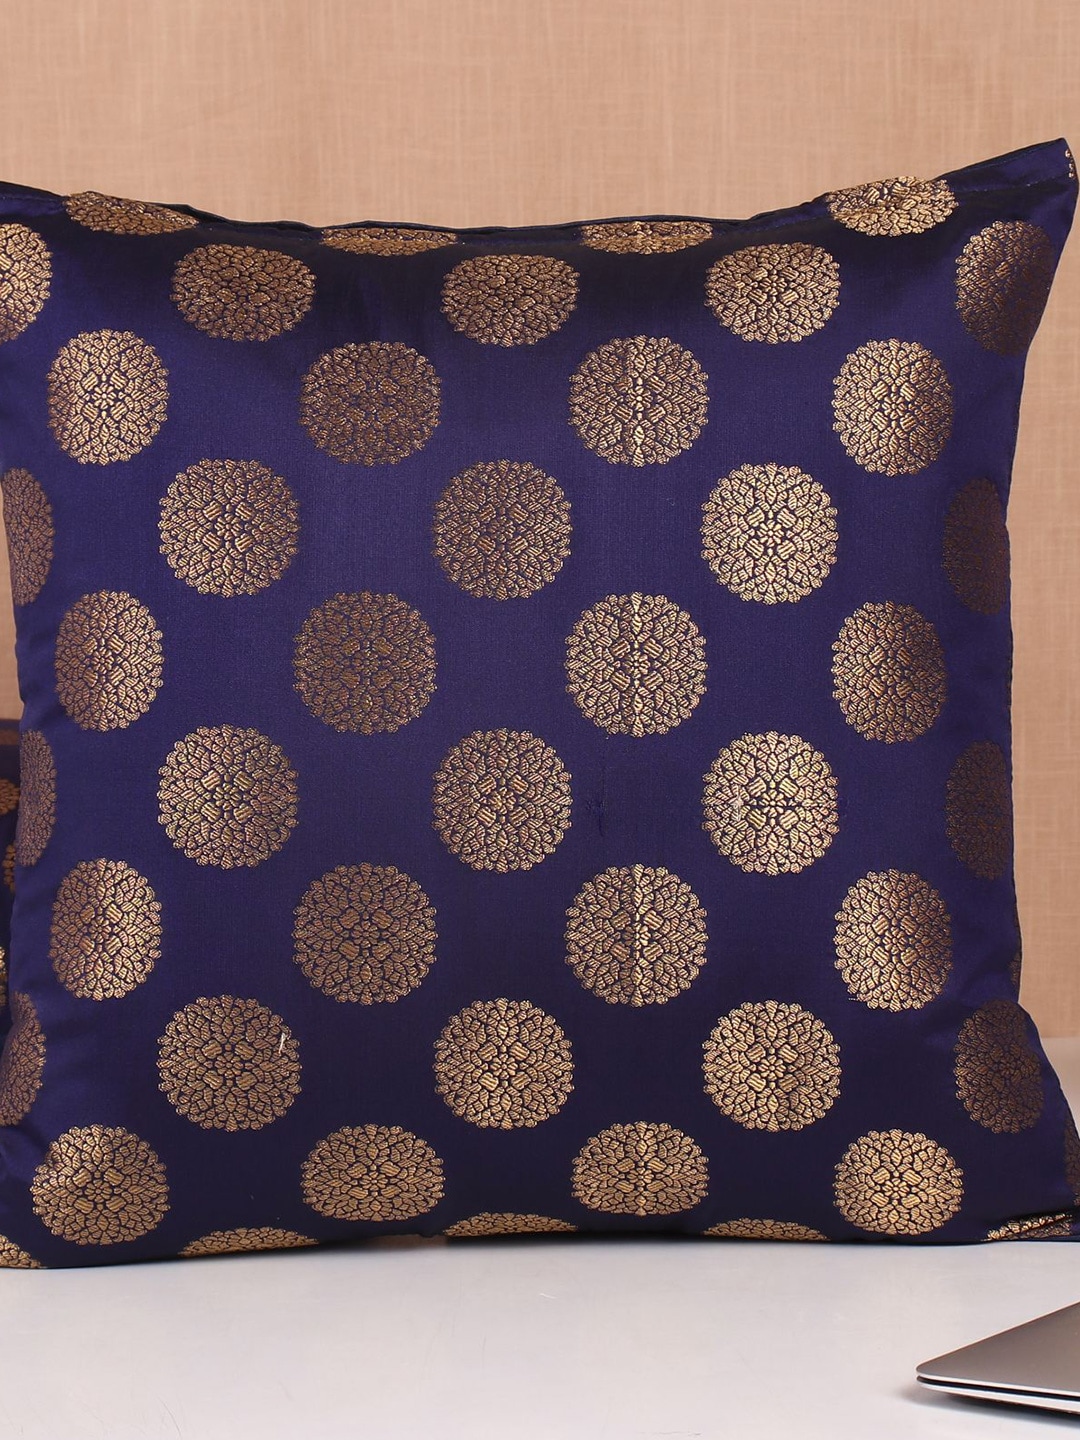 Molcha Set Of 5 Blue & Gold-Toned Banarasi Brocade Square Cushion Covers Price in India